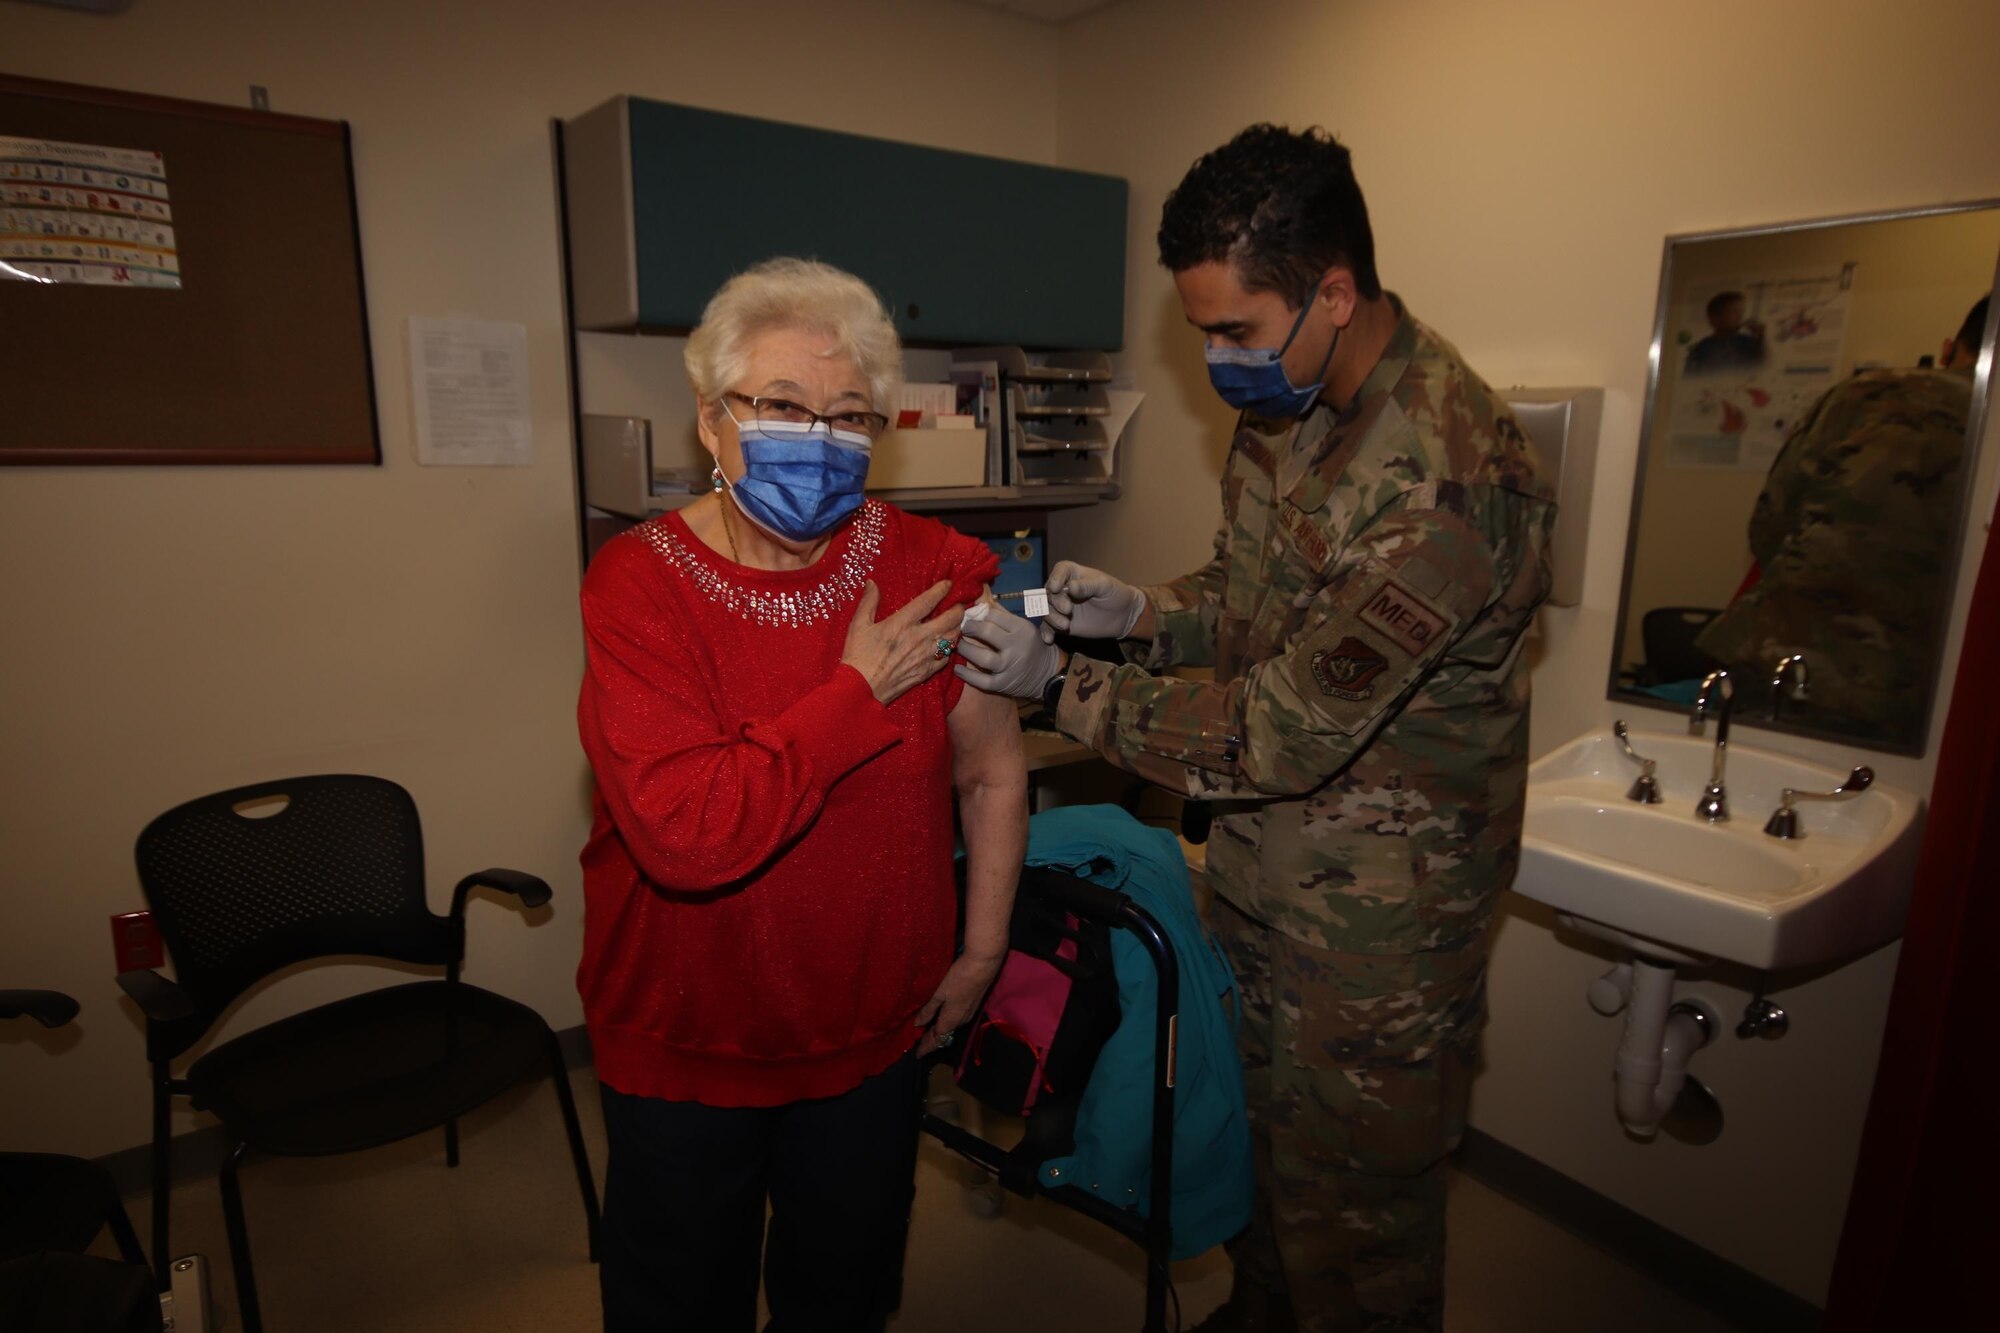 U.S. Air Force Tech. Sgt. Orlando Navarro II, the 673d Healthcare Operations Squadron Allergy and Immunizations Clinic noncommissioned officer in charge, administers the first of a two-dose series of a COVID-19 vaccine to Patricia James, a TRICARE beneficiary, at Joint Base Elmendorf-Richardson, Alaska, Jan. 29, 2021. JBER is inoculating personnel following the Department of Defense’s prioritization guidelines. The vaccines are part of Operation Warp Speed, a national initiative to accelerate the development, production and distribution of safe and effective COVID-19 vaccines, therapeutics and diagnostics.